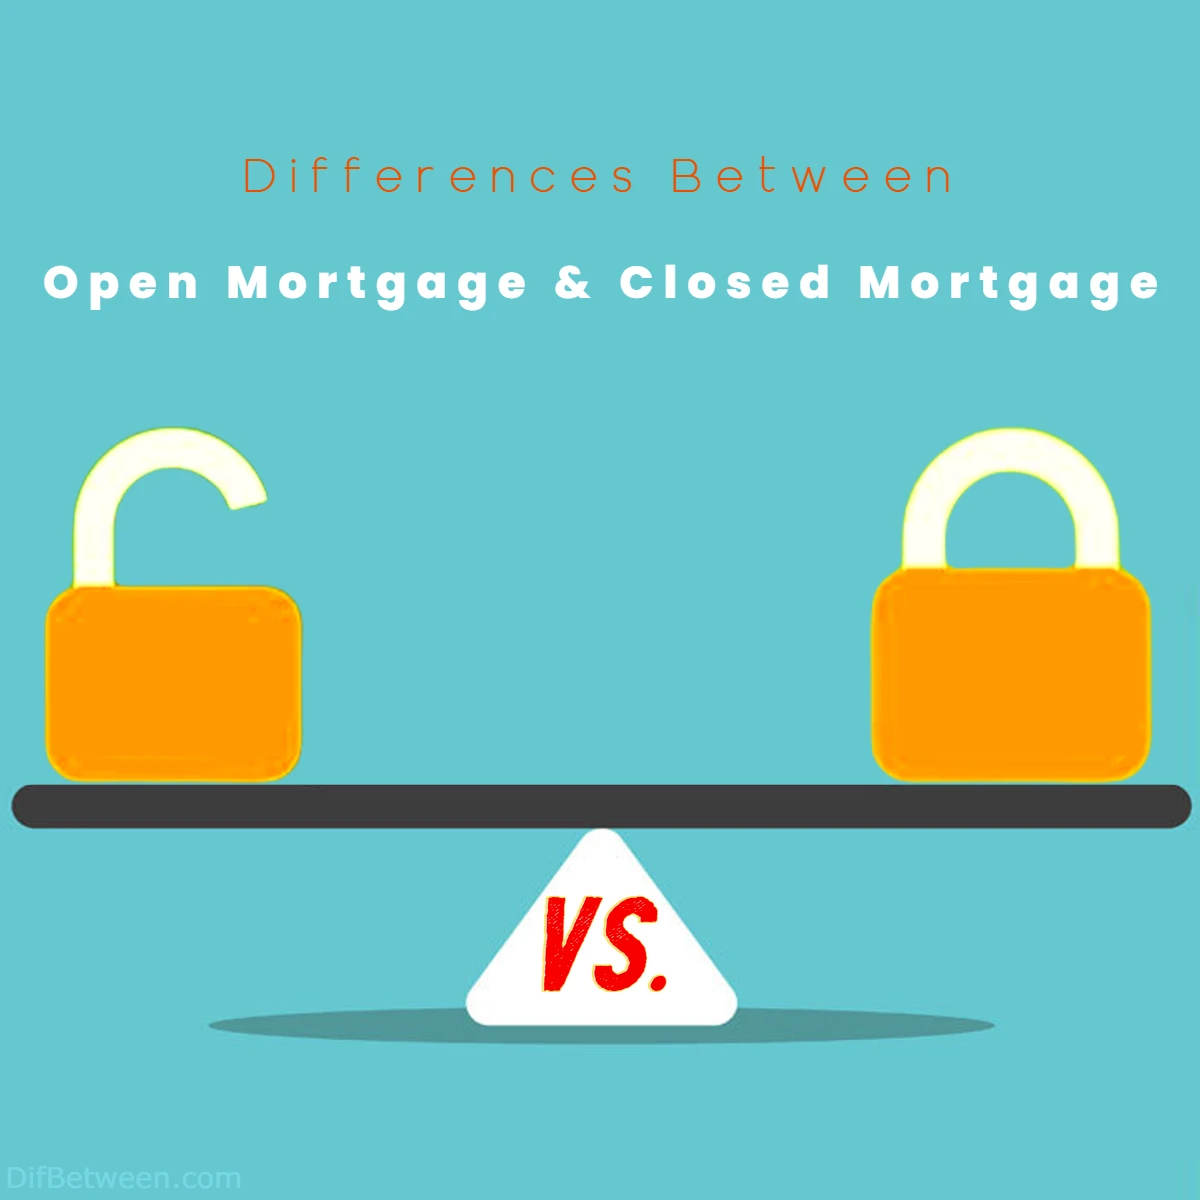 Differences Between Closed Mortgage and Open Mortgage